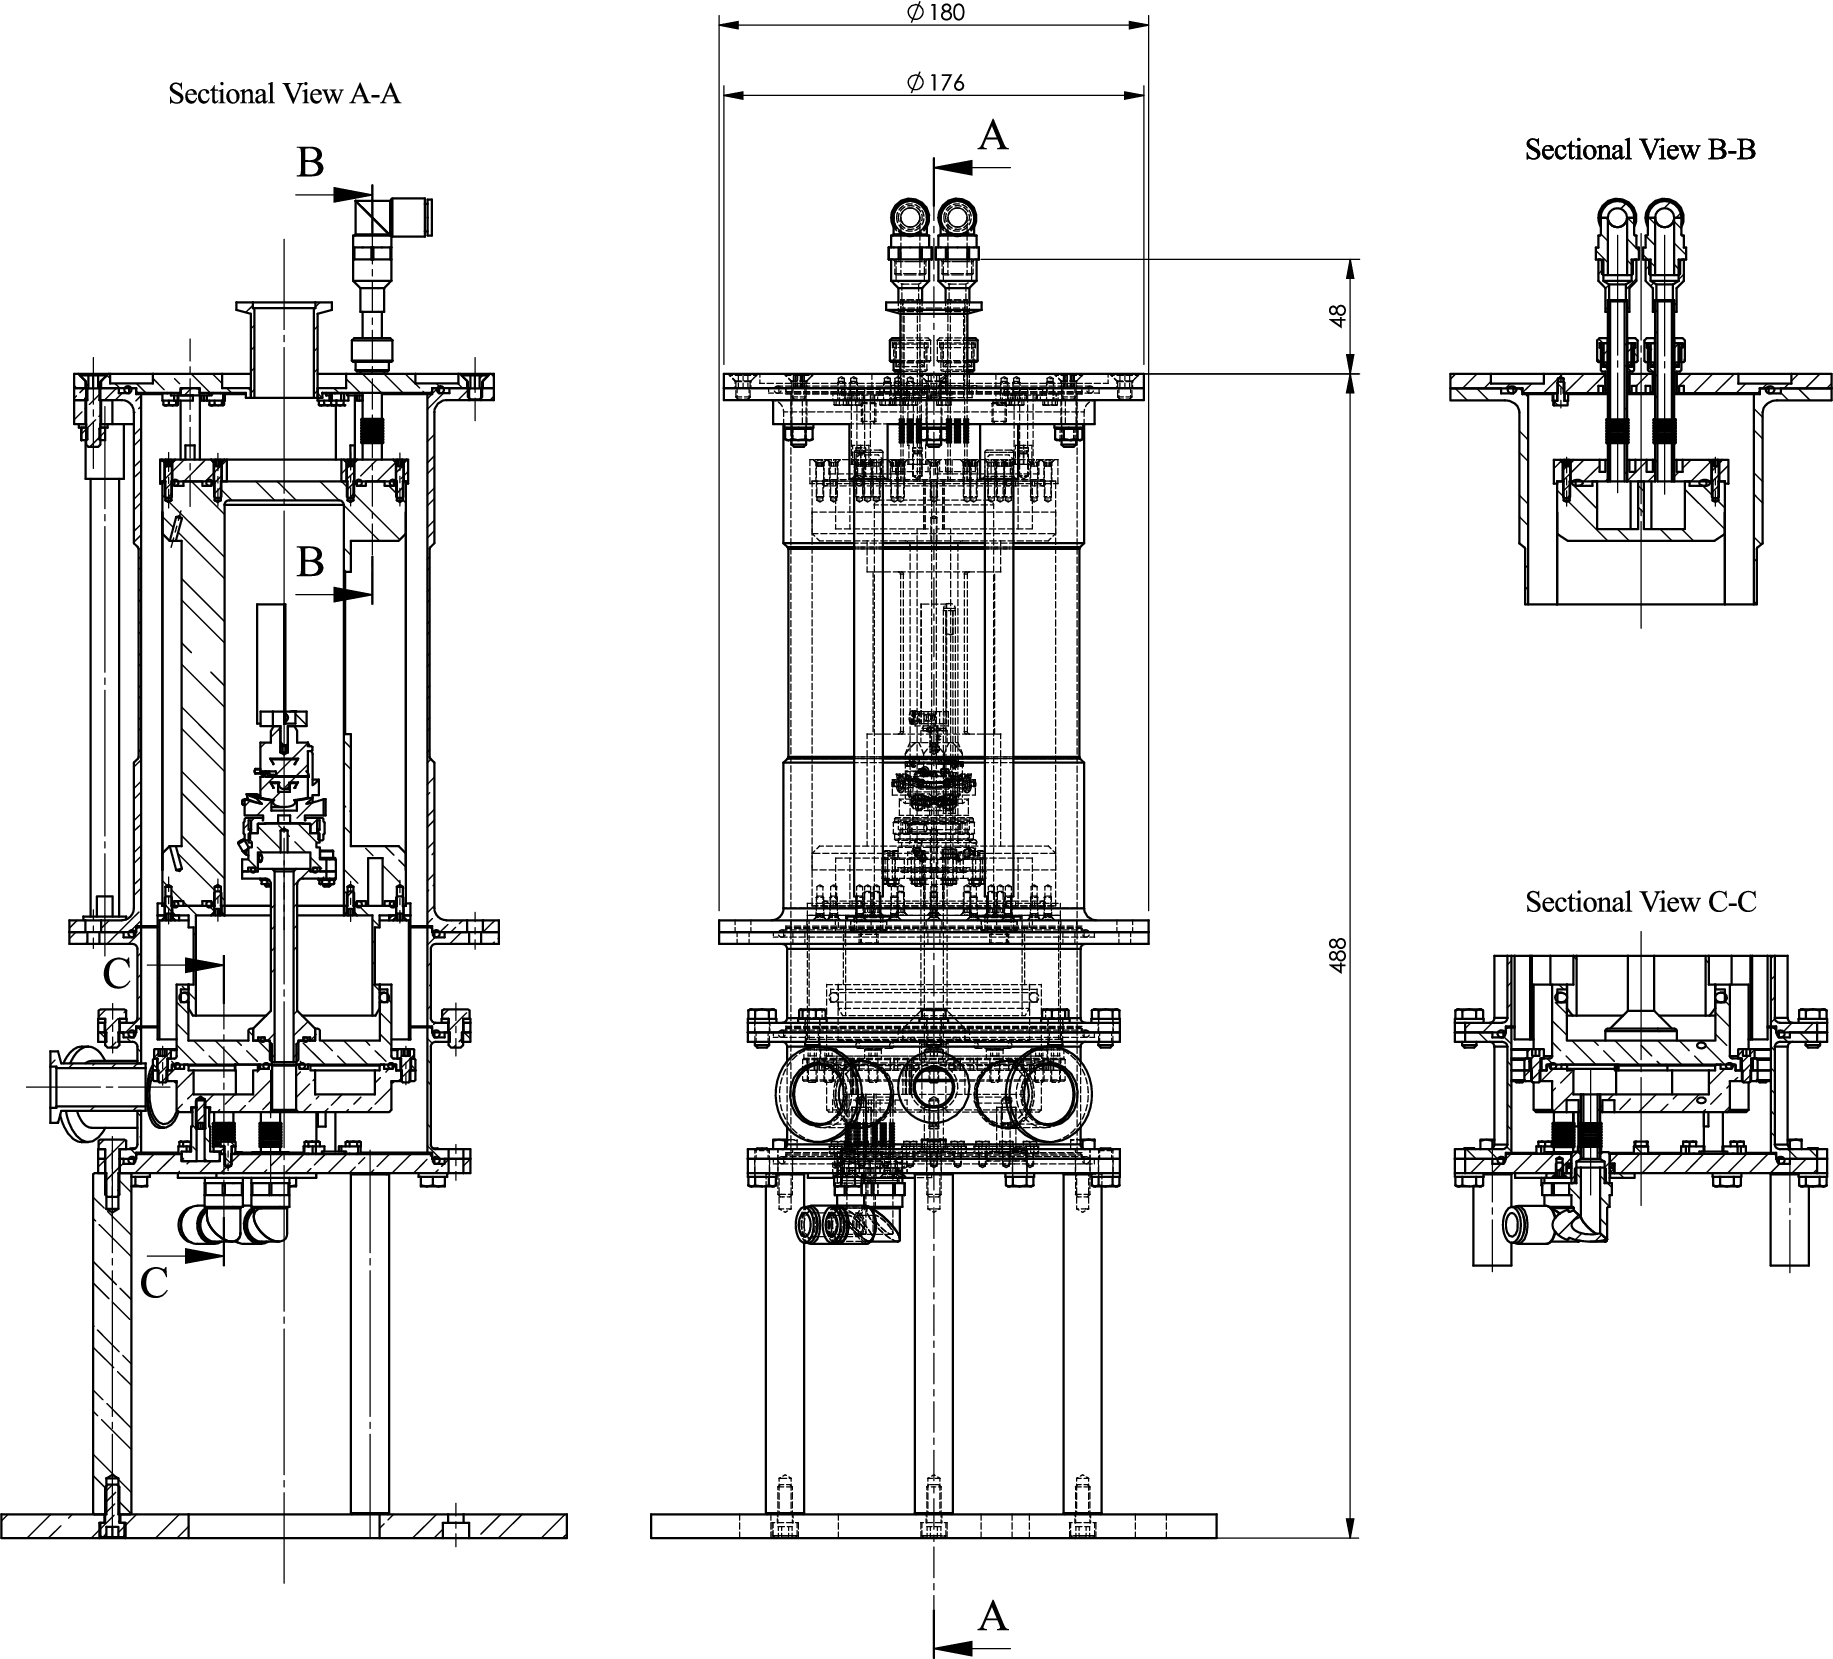 Drawings of the humidity chamber produced with SolidWorks [7]. Sectional view A-A shows the interior of the cell and sectional views B-B and C-C show respectively details of the circuitry of the upper (sample) and lower (water bath) parts of the chamber.